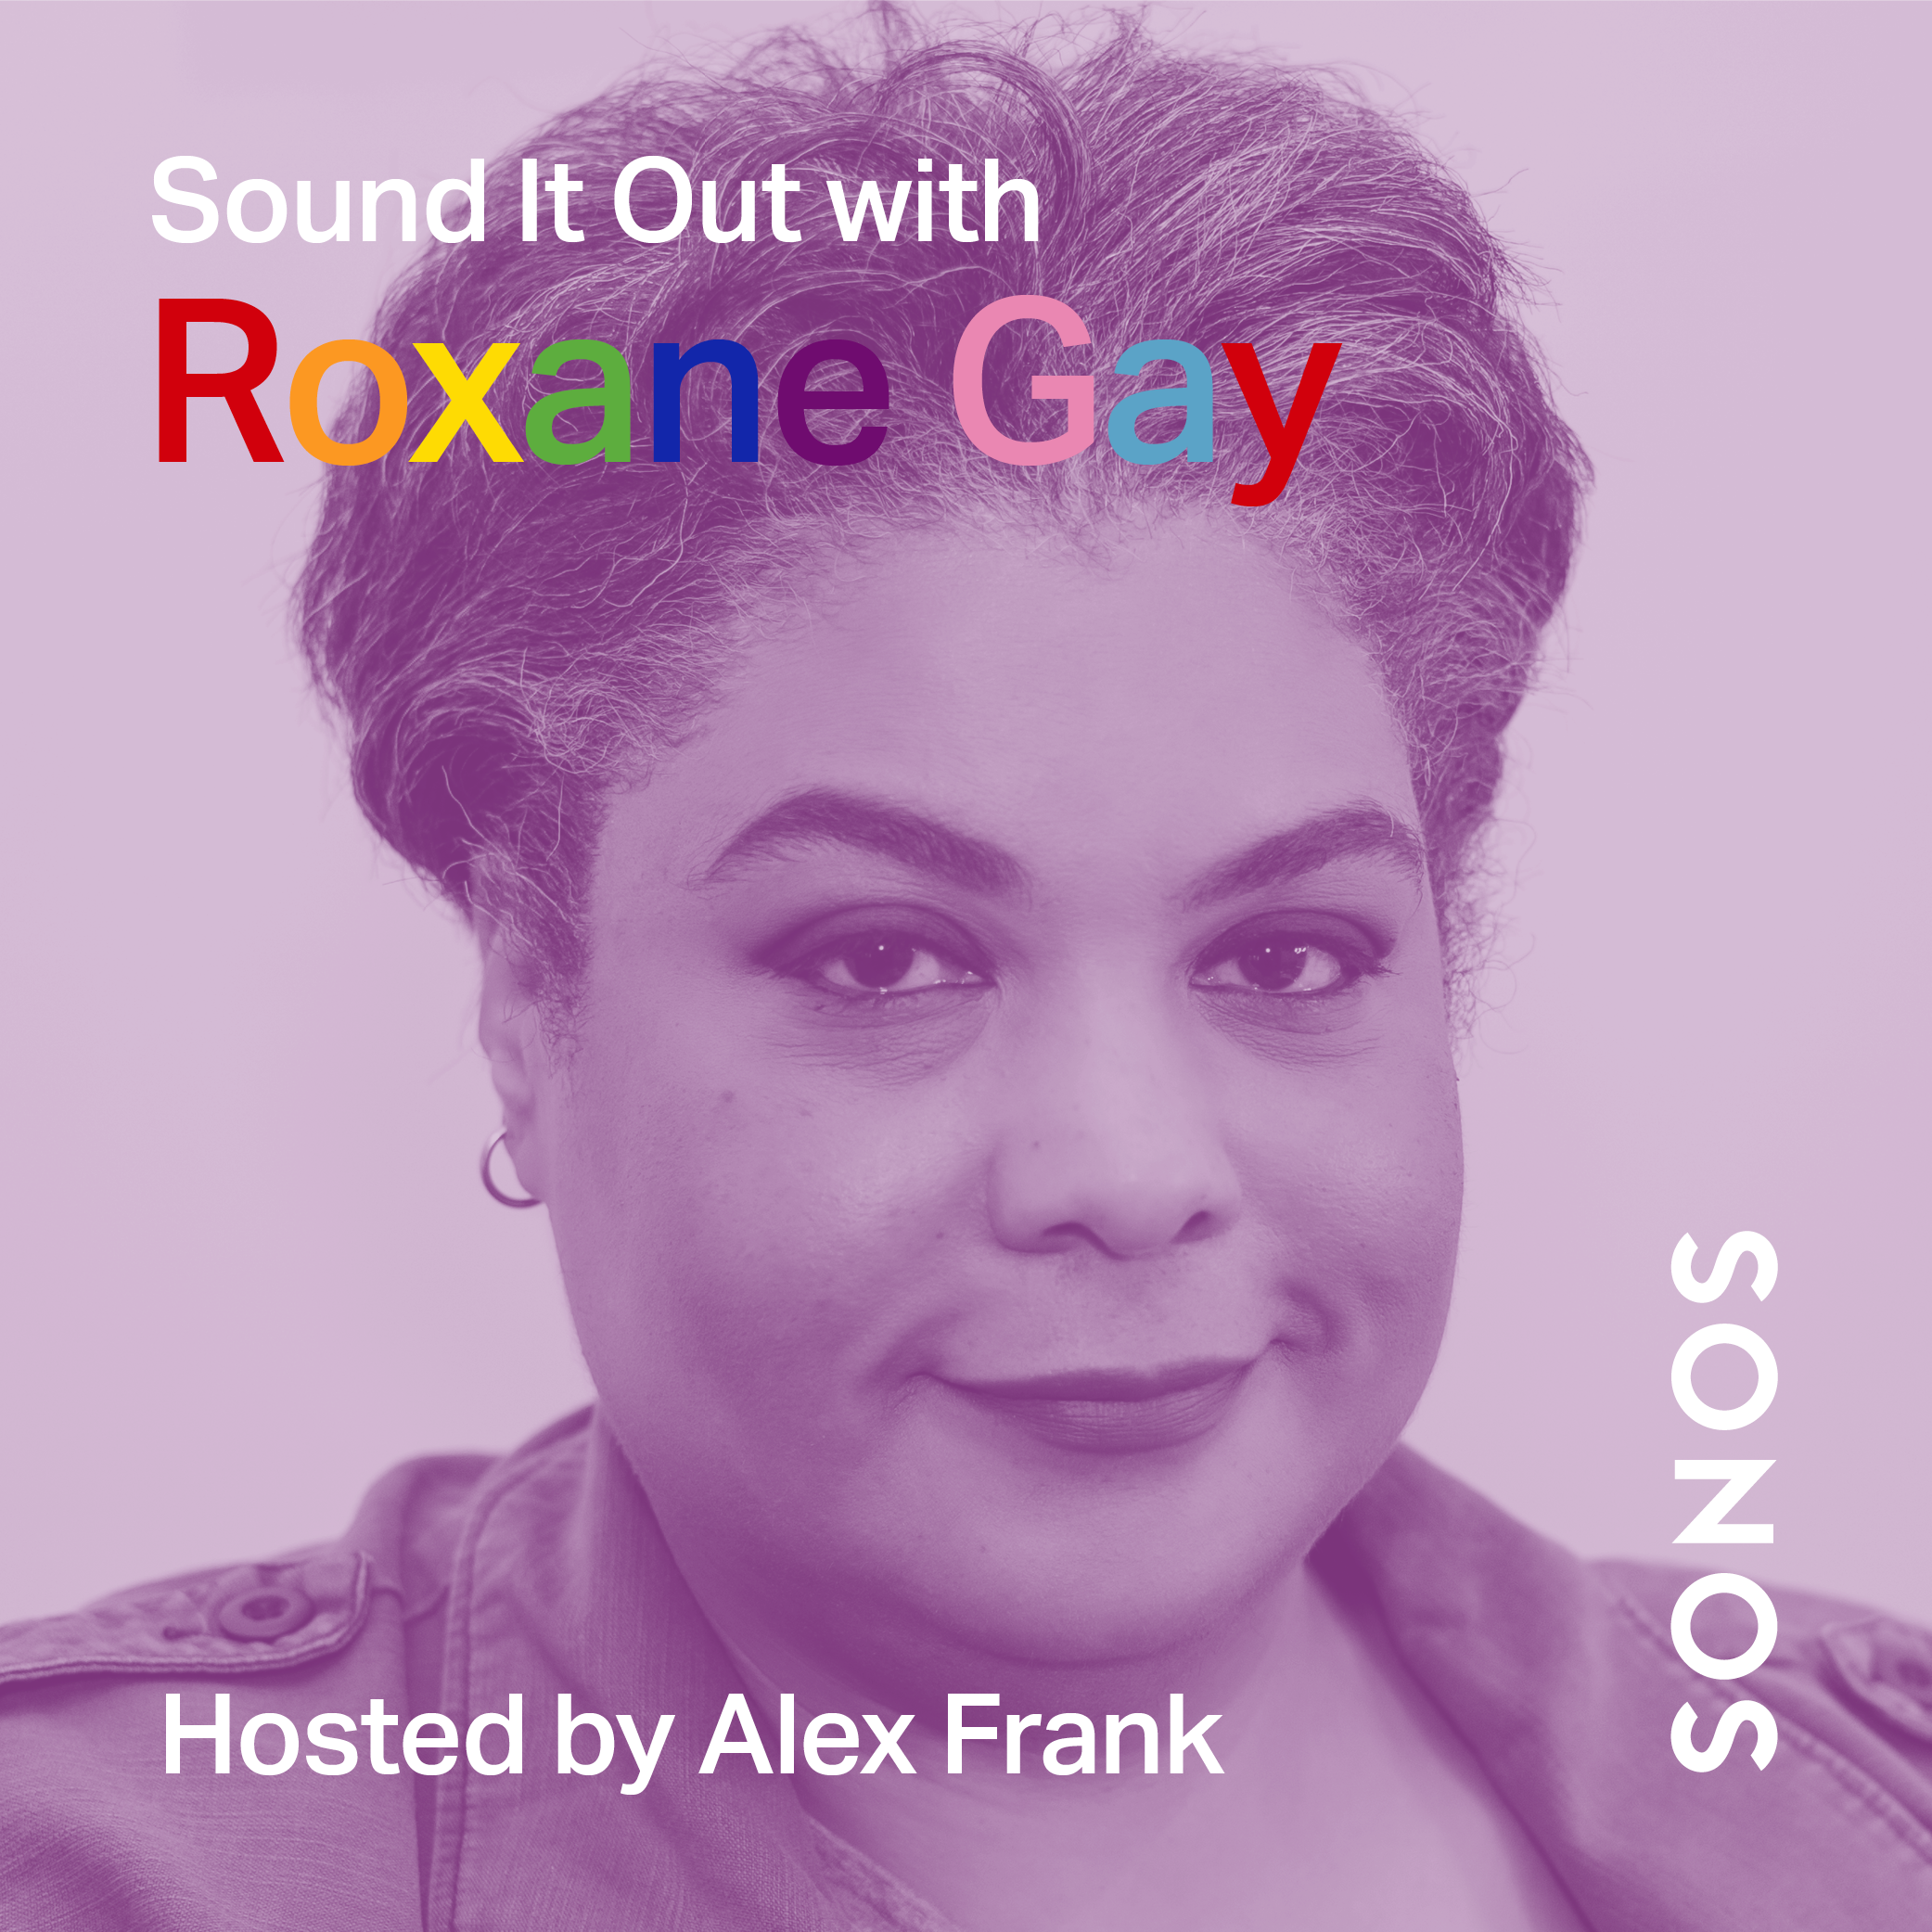 <a href="https://www.mixcloud.com/sonos/sound-it-out-with-roxane-gay/" target="_blank">SONOS RADIO</a>